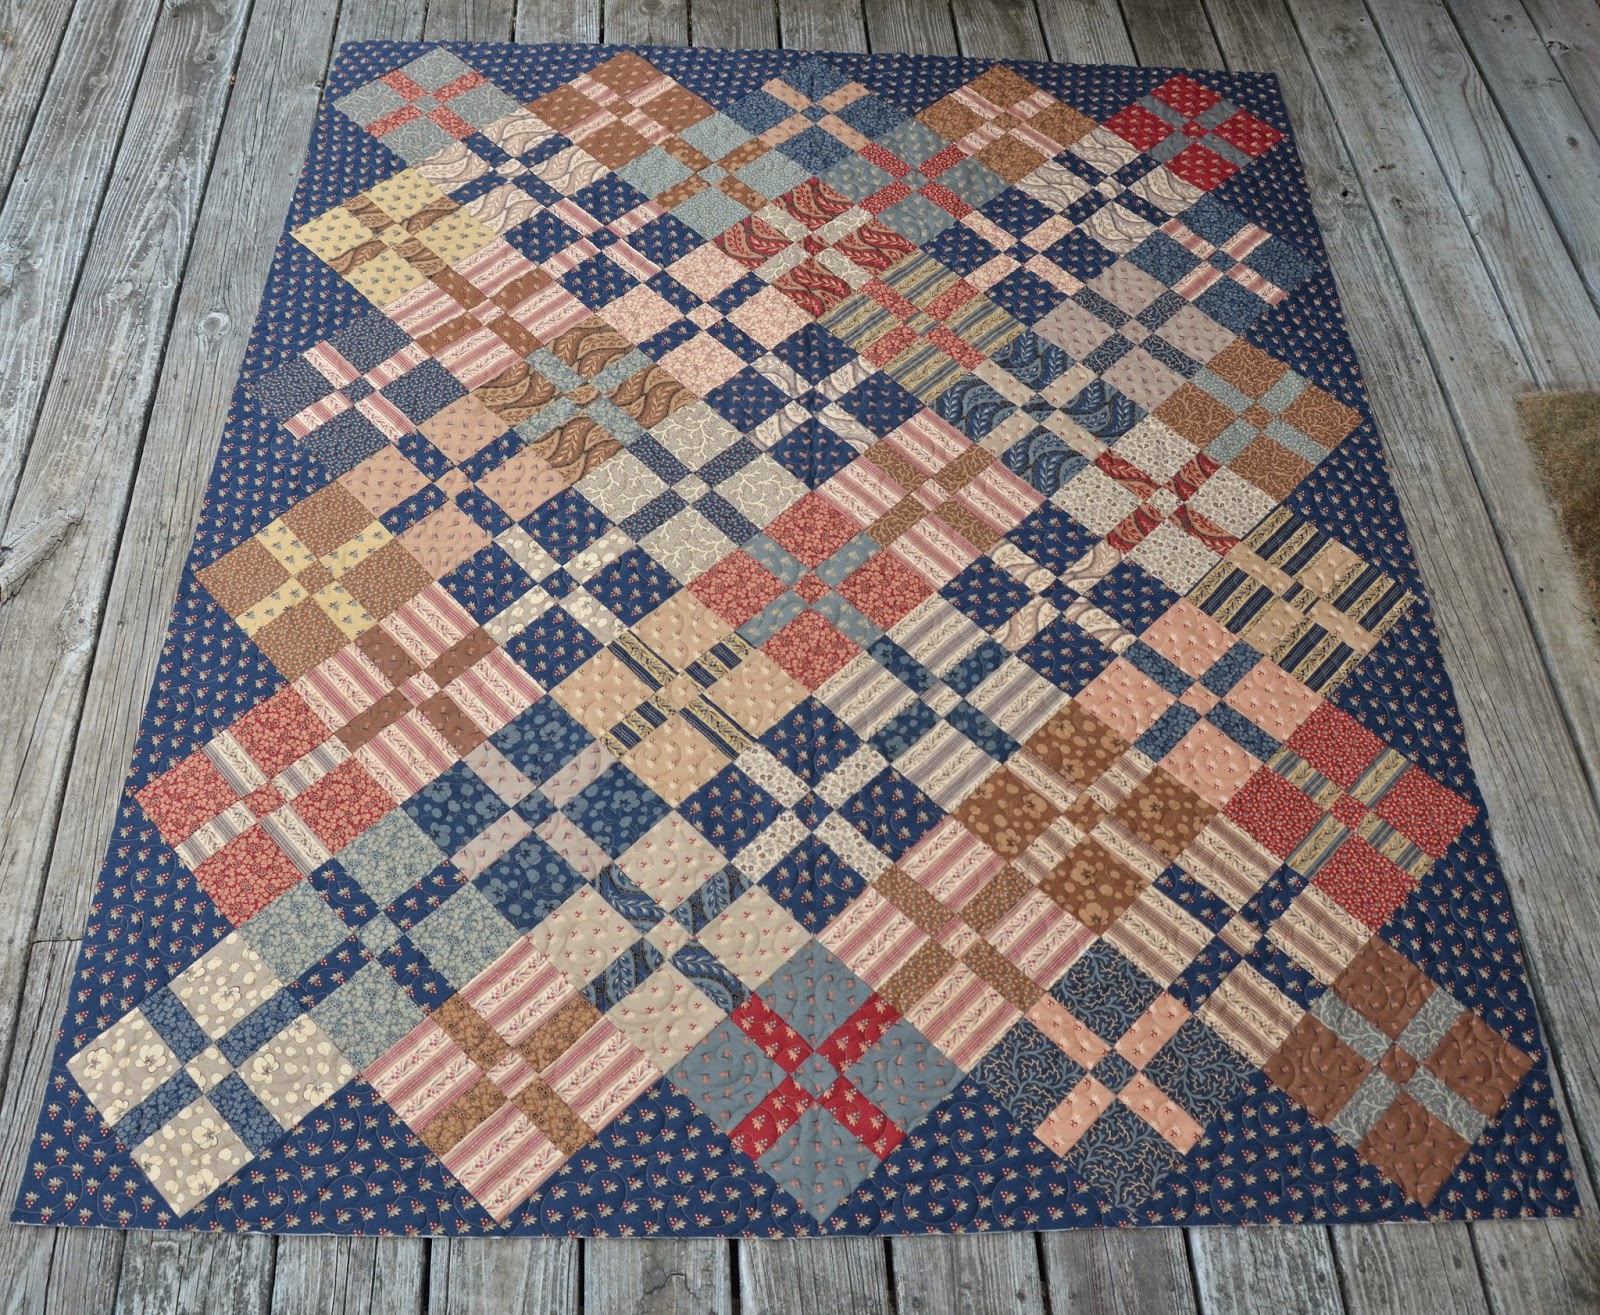 Front Porch Indiana: Giving a Quilt is Like Giving a Hug That Never Stops